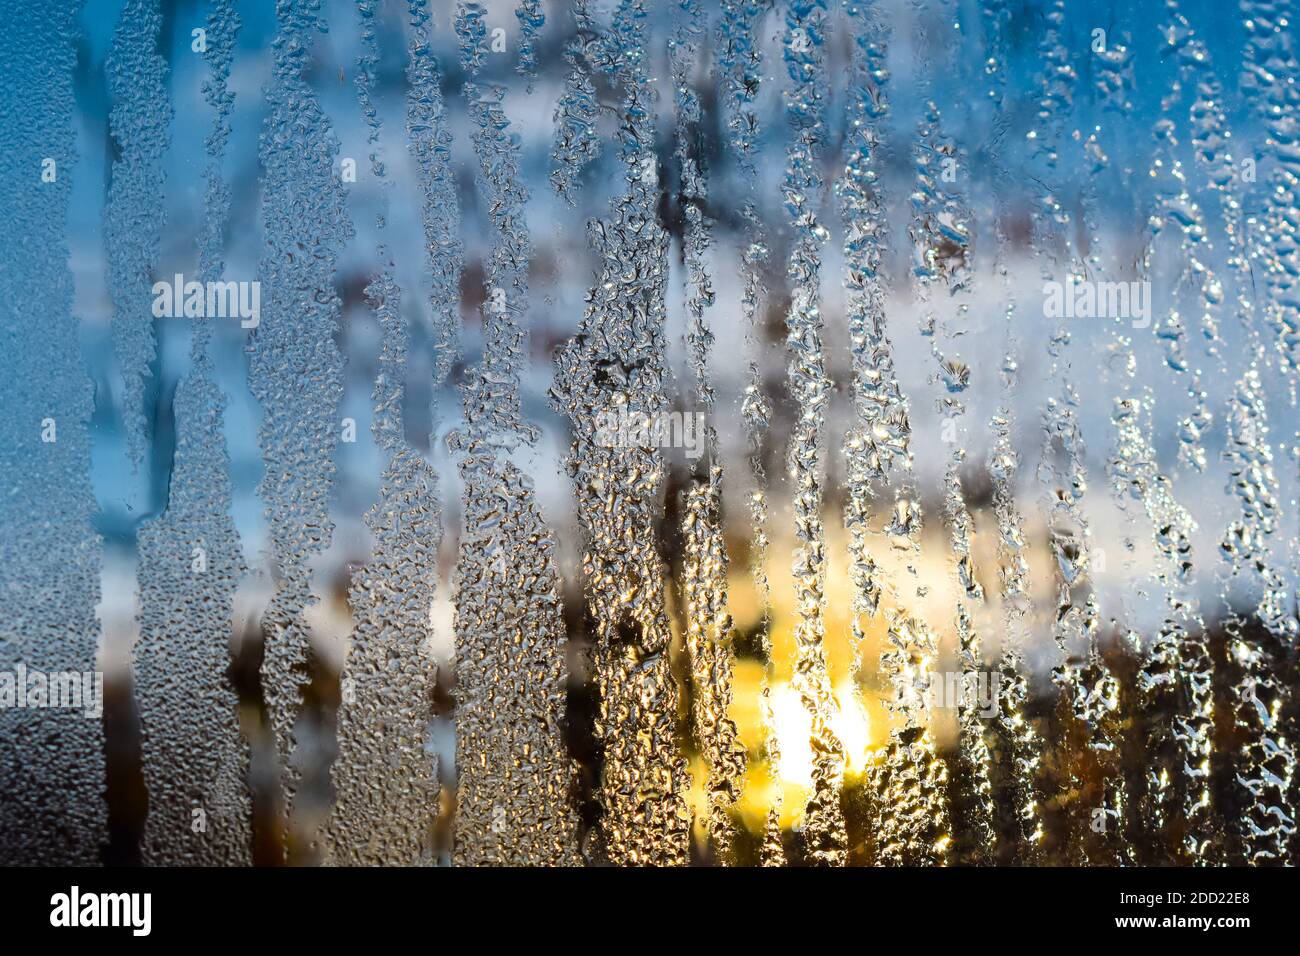 Frozen water drops on the window glass on a winter morning. Stock Photo